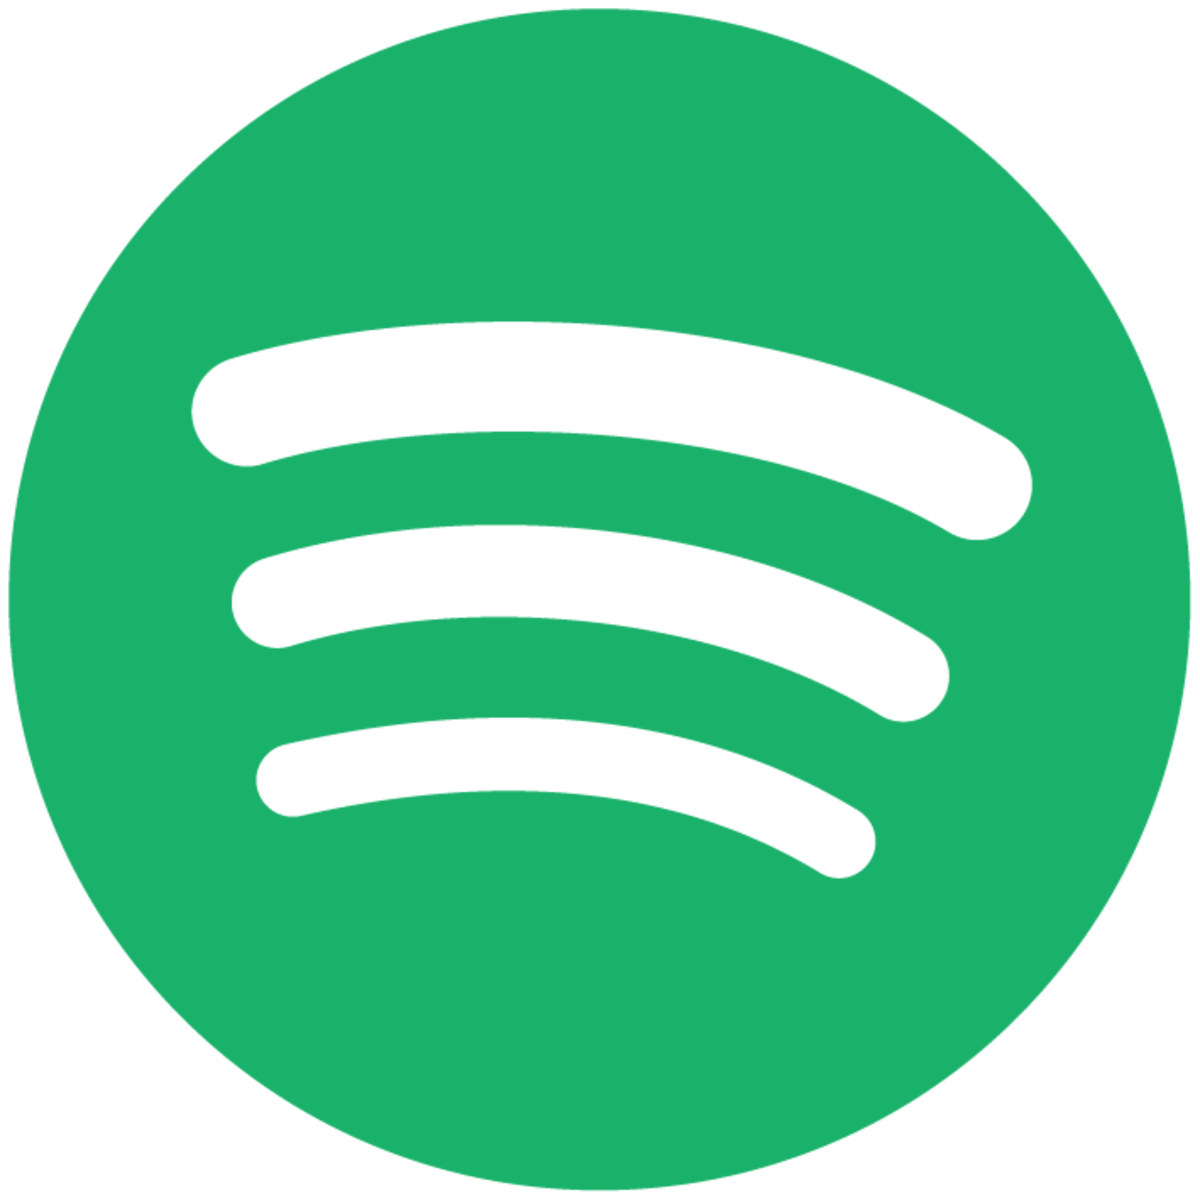 Spotify introduces Premium Family Plan in India, costs Rs 